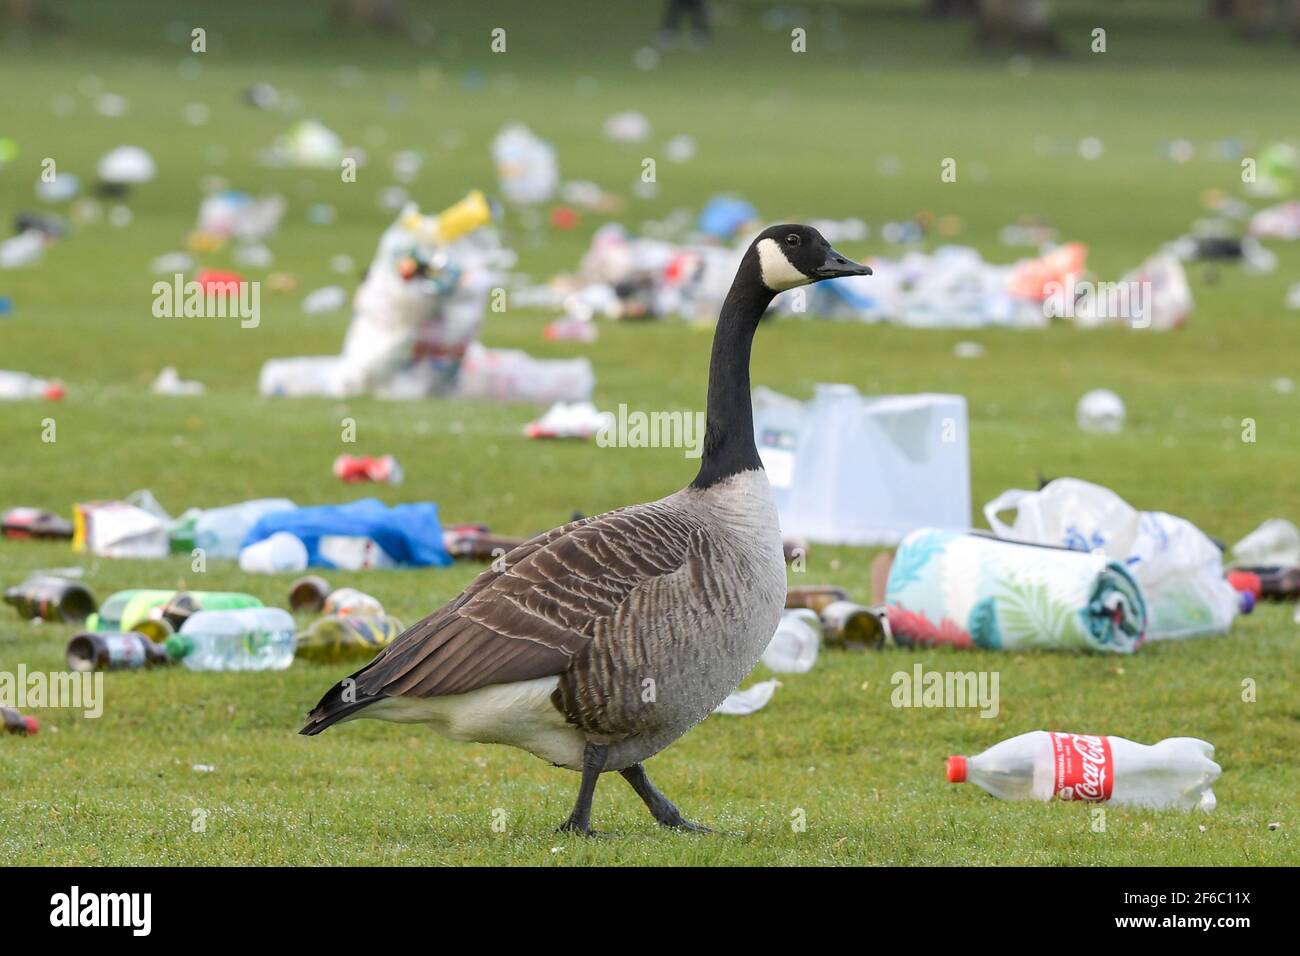 Birmingham, West Midlands, UK. 31st Mar, 2021. A sea of litter was left strewn across Cannon Hill Park this morning after scores of people came to sunbathe in yesterday's record breaking March temperatures. Glass bottles, hippy crack gas cannisters and BBQ's were dumped on the grass. A Canada Goose waddled through the heart breaking mess in almost disbelief at what its home has become. Waste bins were also overflowing with trash. Pic by Credit: Sam Holiday/Alamy Live News Stock Photo